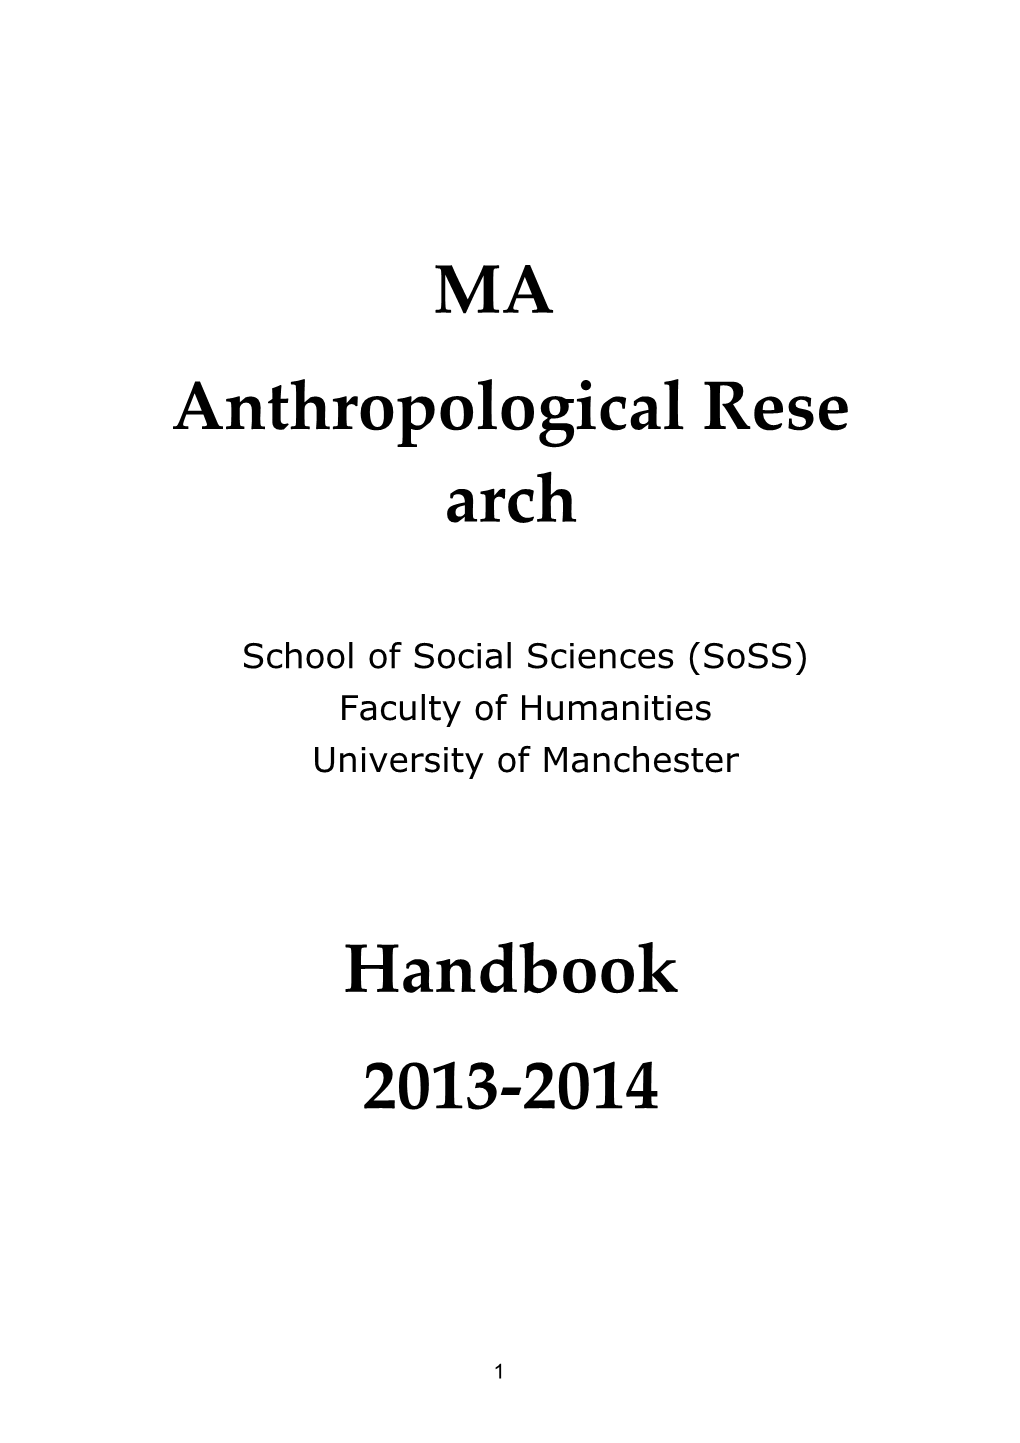 Anthropological Research